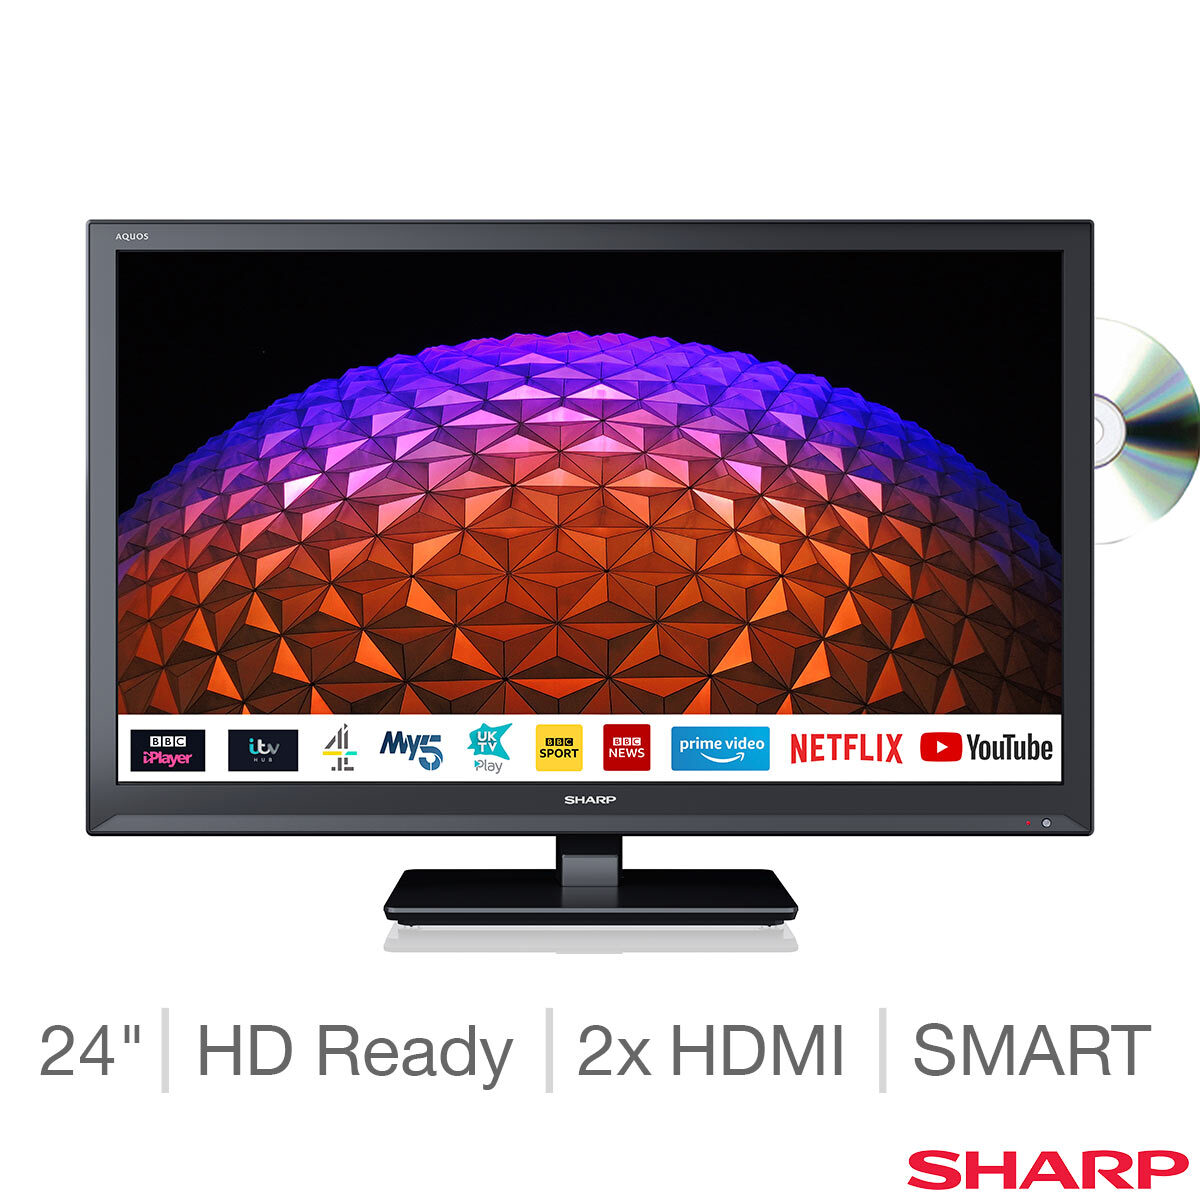 Sharp 1t C24be0kr1fb 24 Inch Hd Ready Smart Tv With Built In Dvd Player Costco Uk